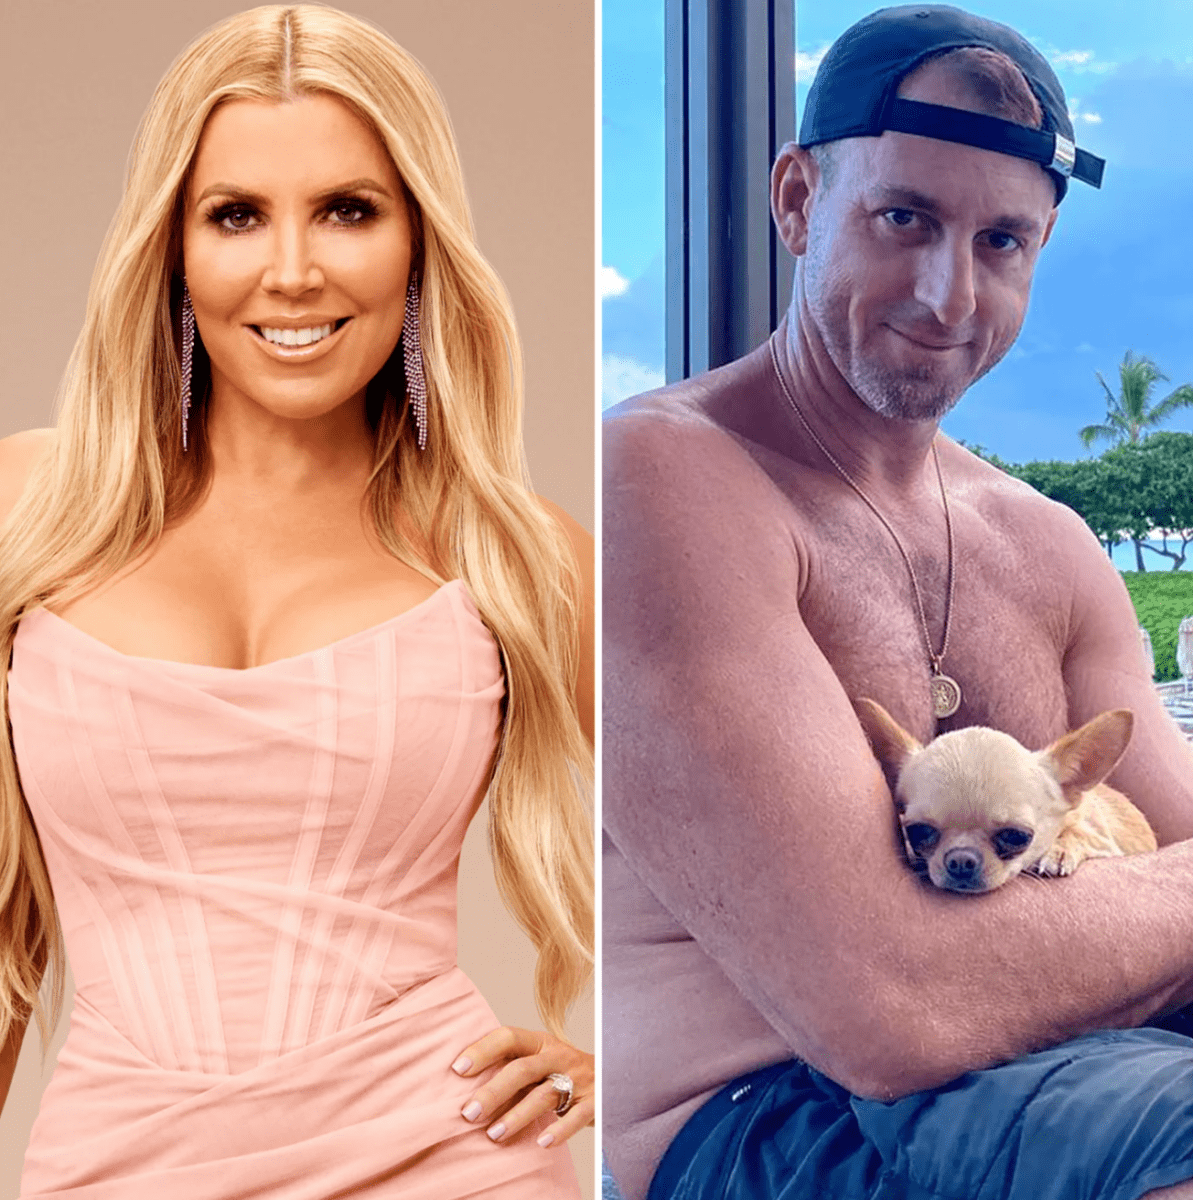 RHOC alums Jen and Ryne are back together two years after filing for divorce